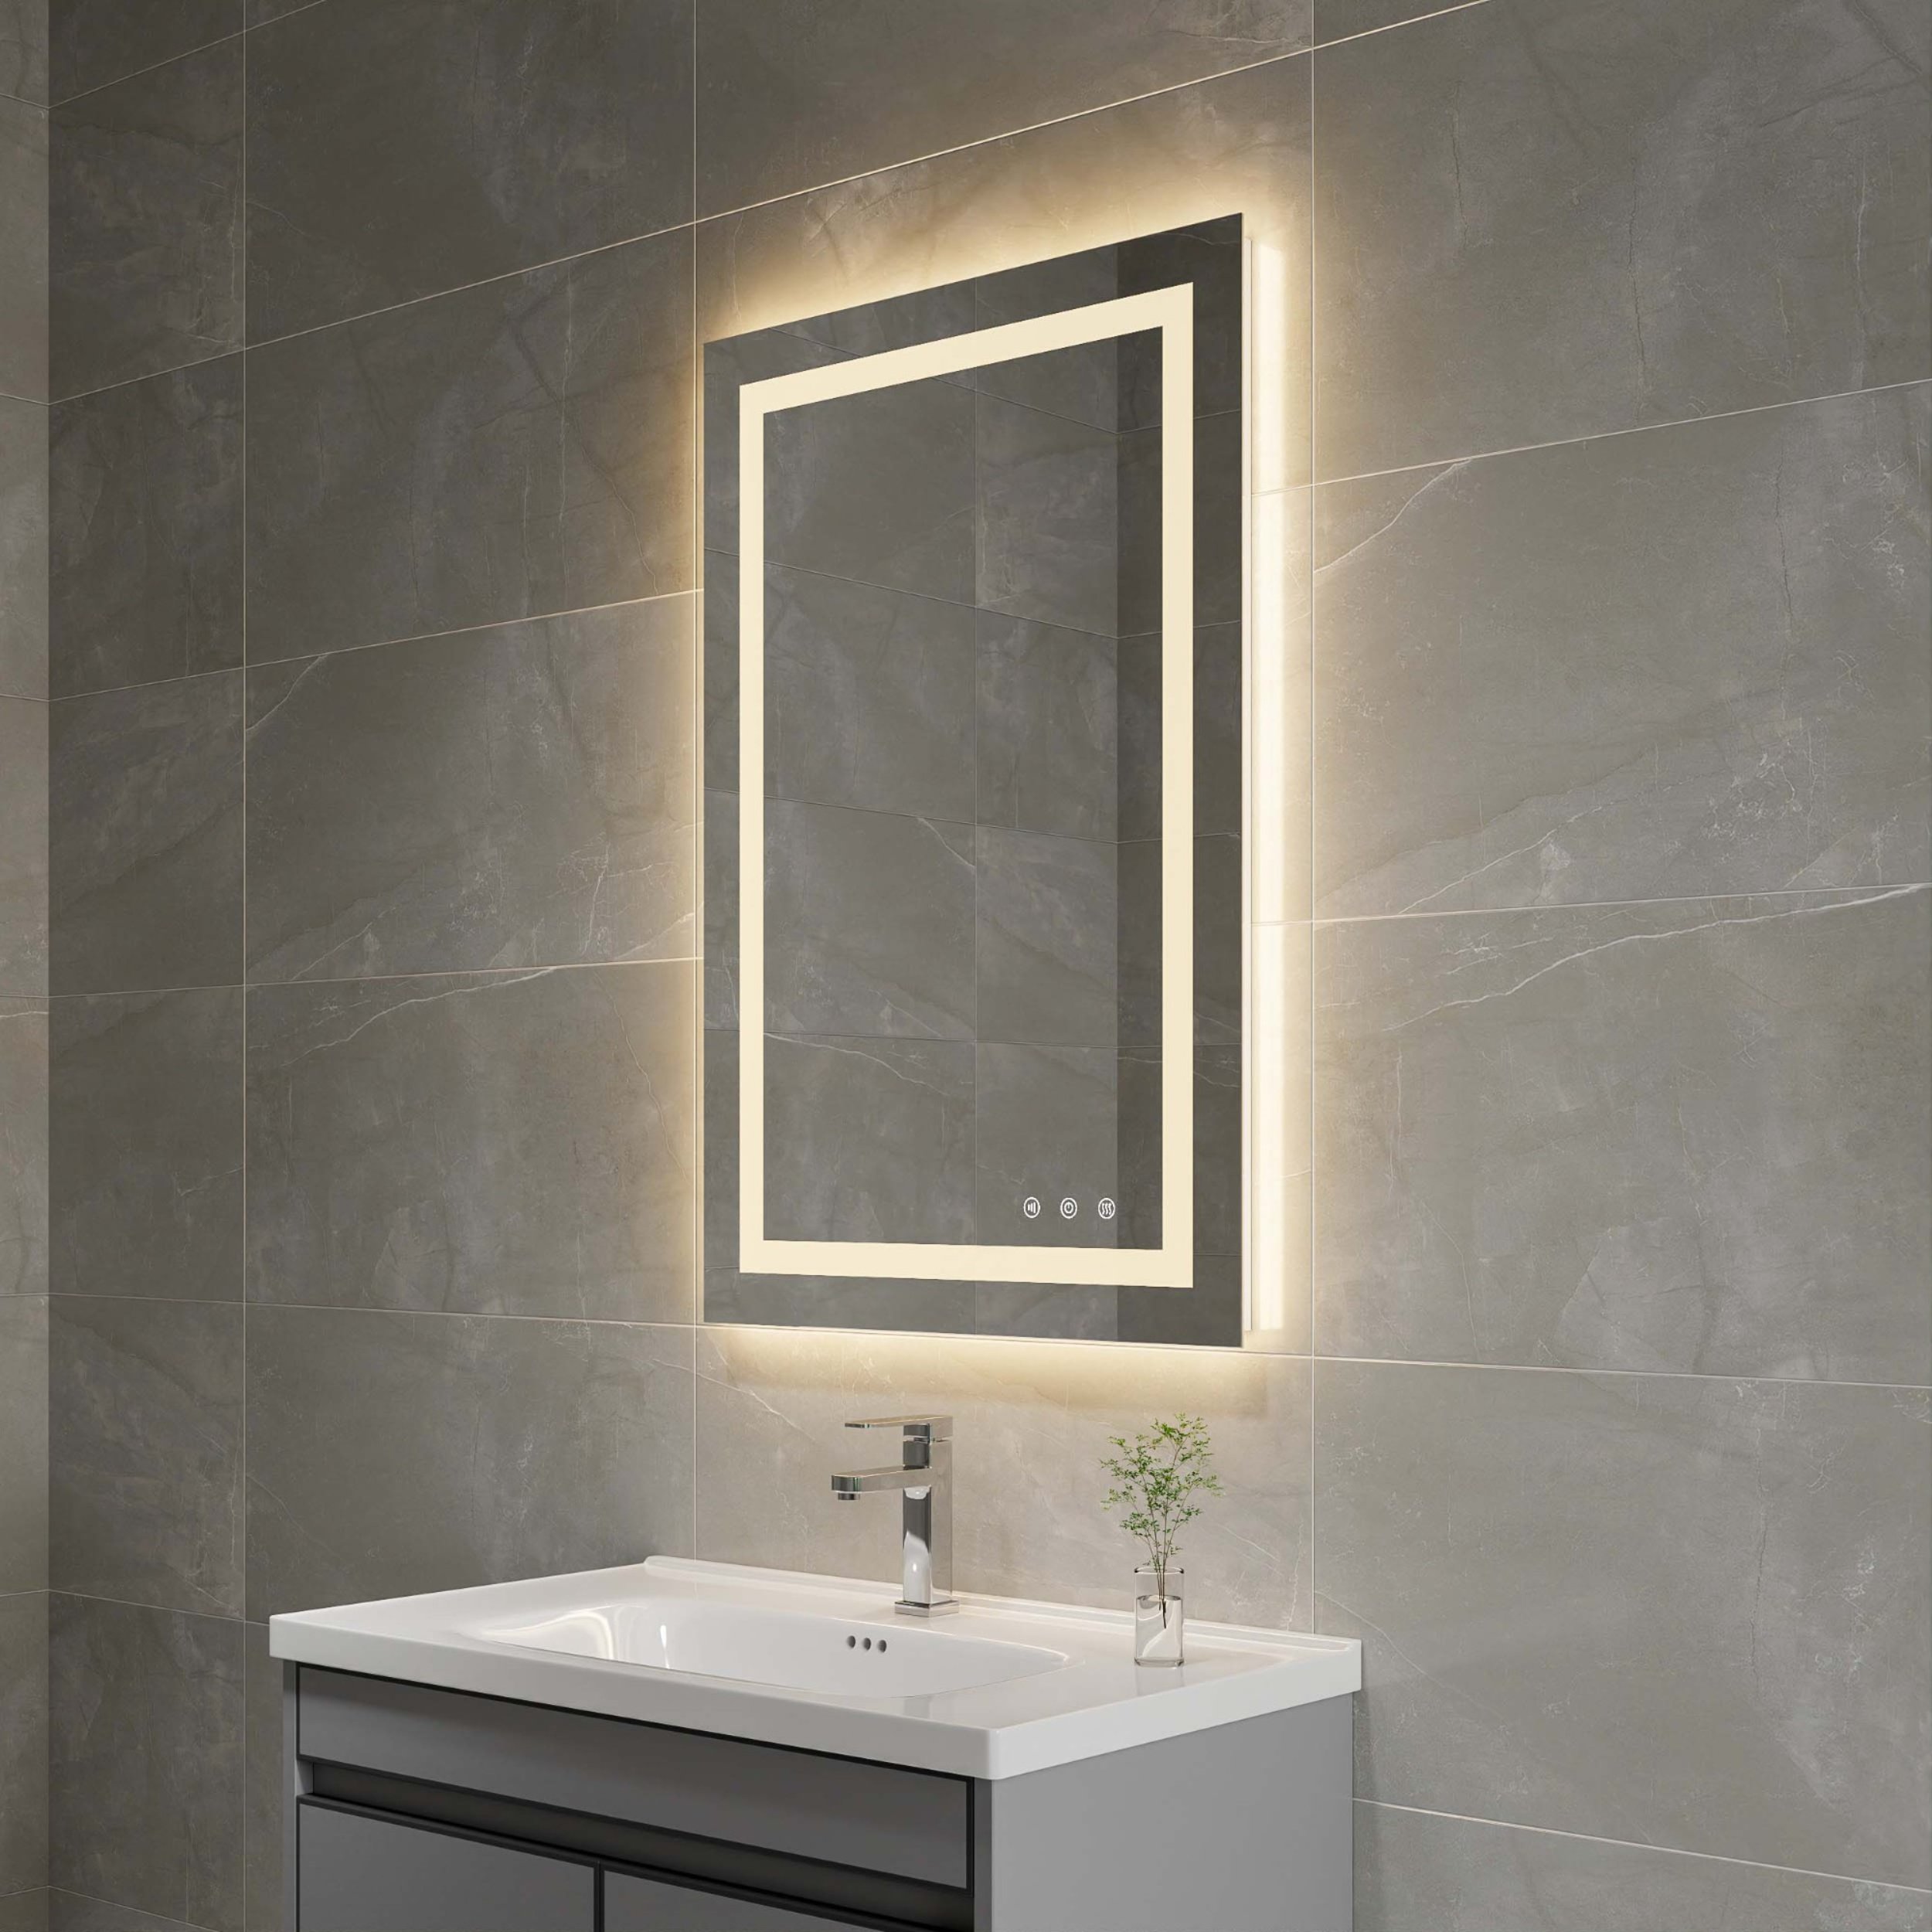 Enhancing Bathroom Design: DAPAI Mirror and Vancouver Decoration Company Join Forces